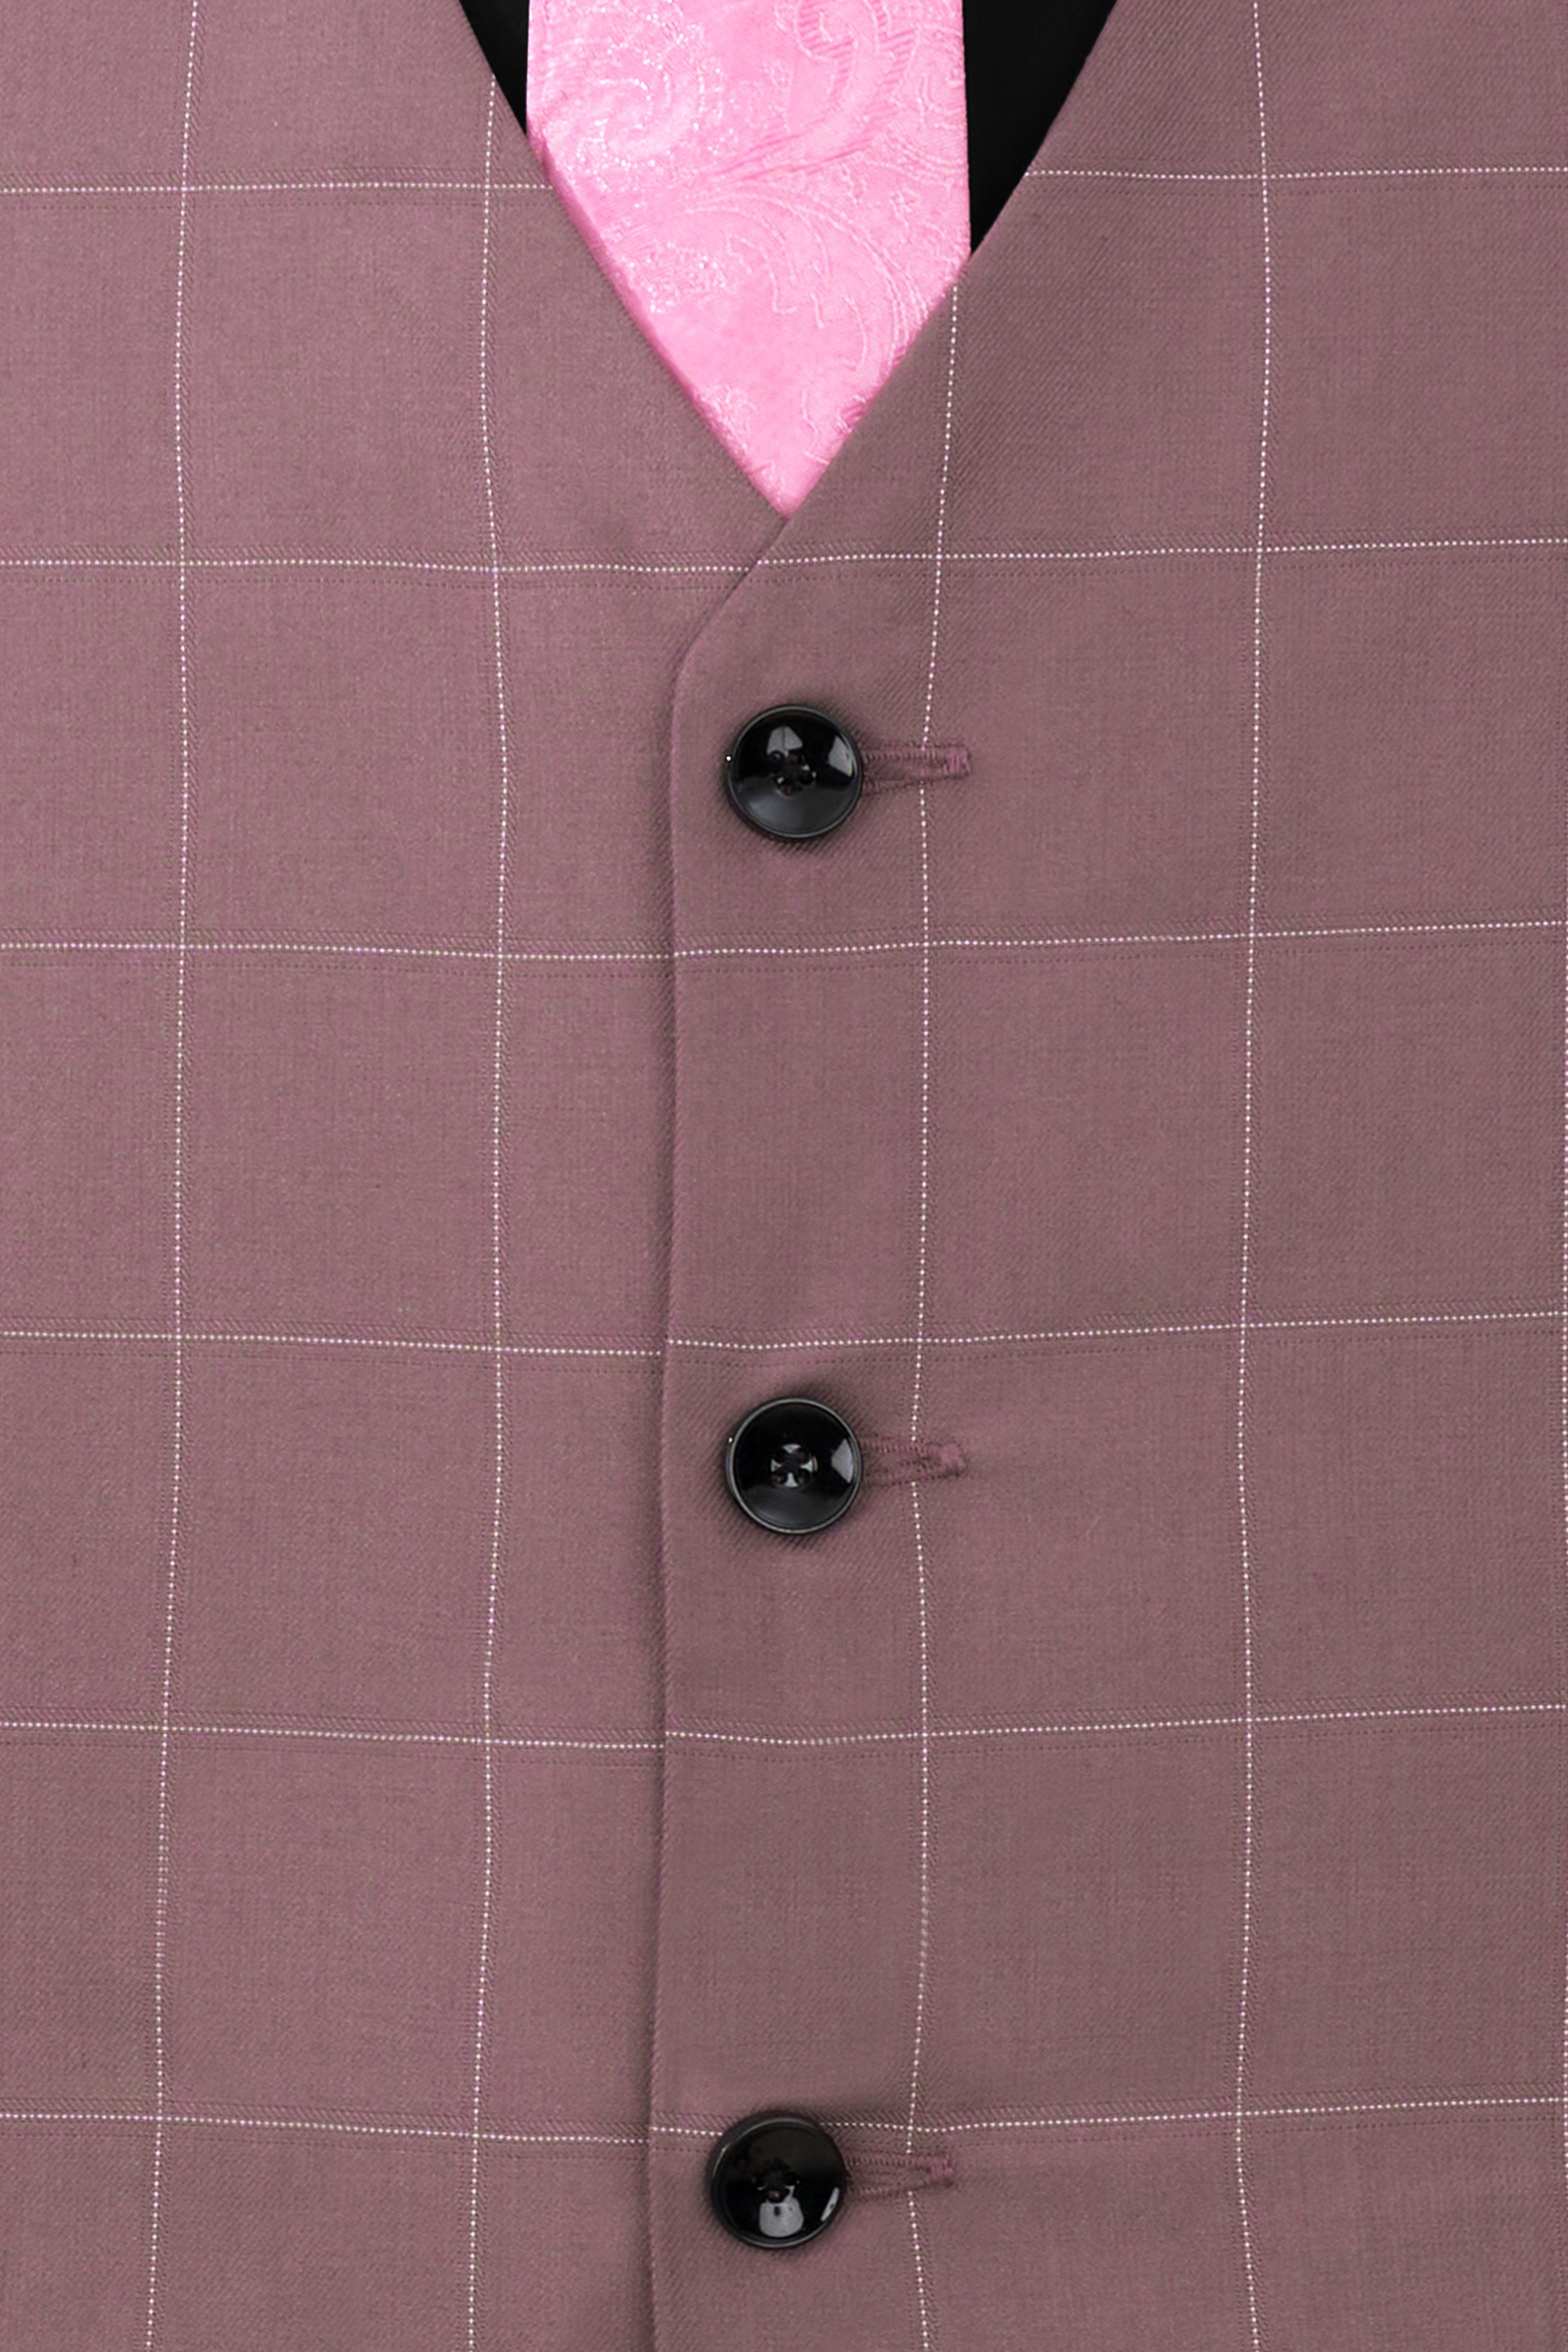 Falcon Pink Windowpane Single Breasted Suit